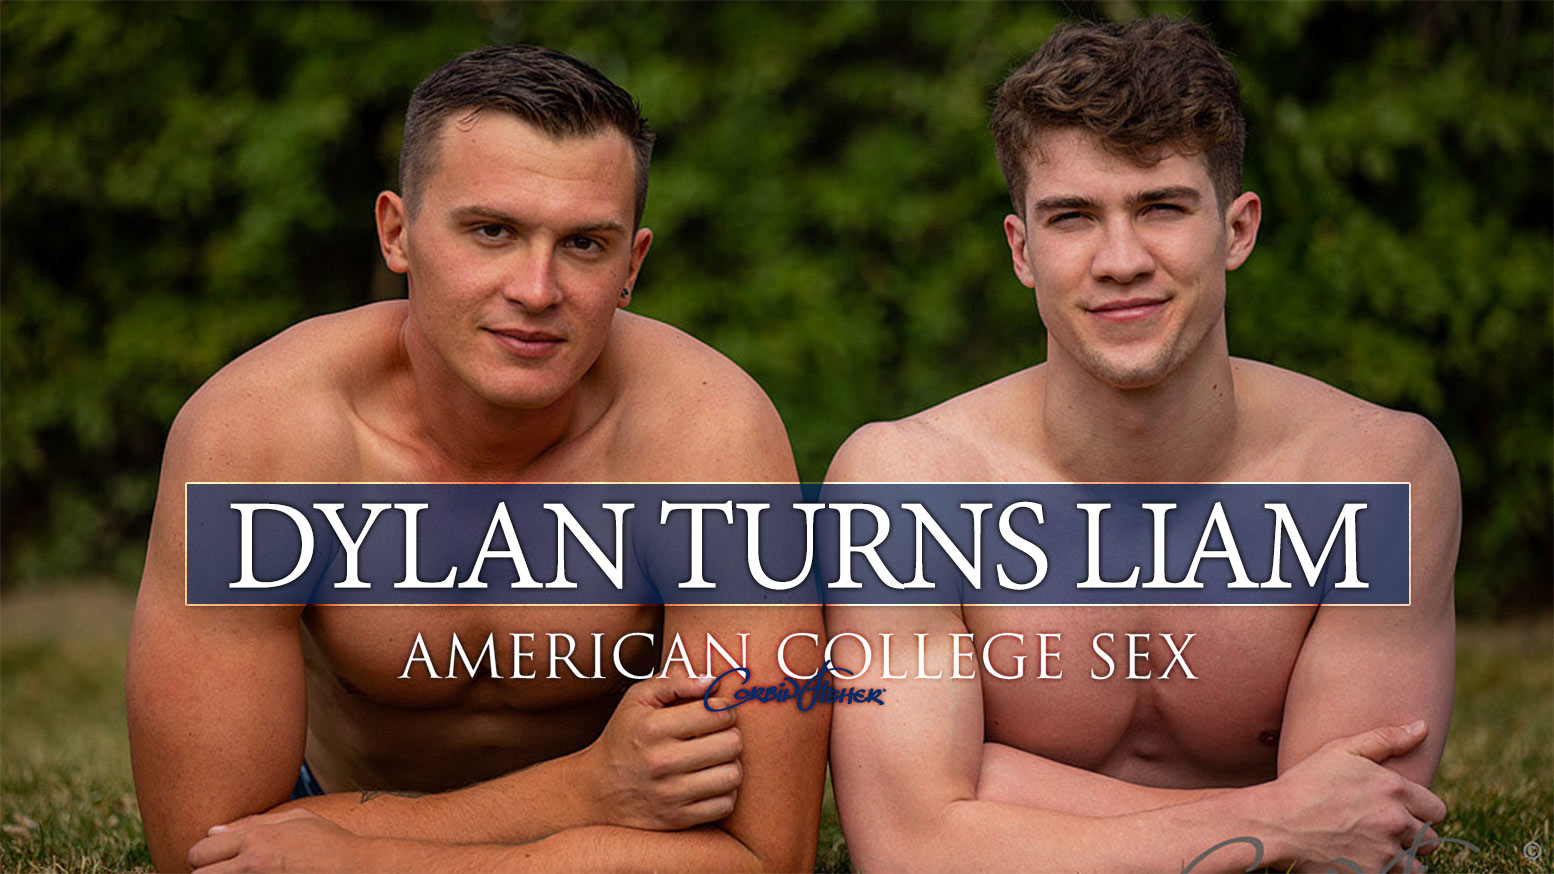 Dylan turns liam corbin fisher ❤️ Best adult photos at gayporn.id picture